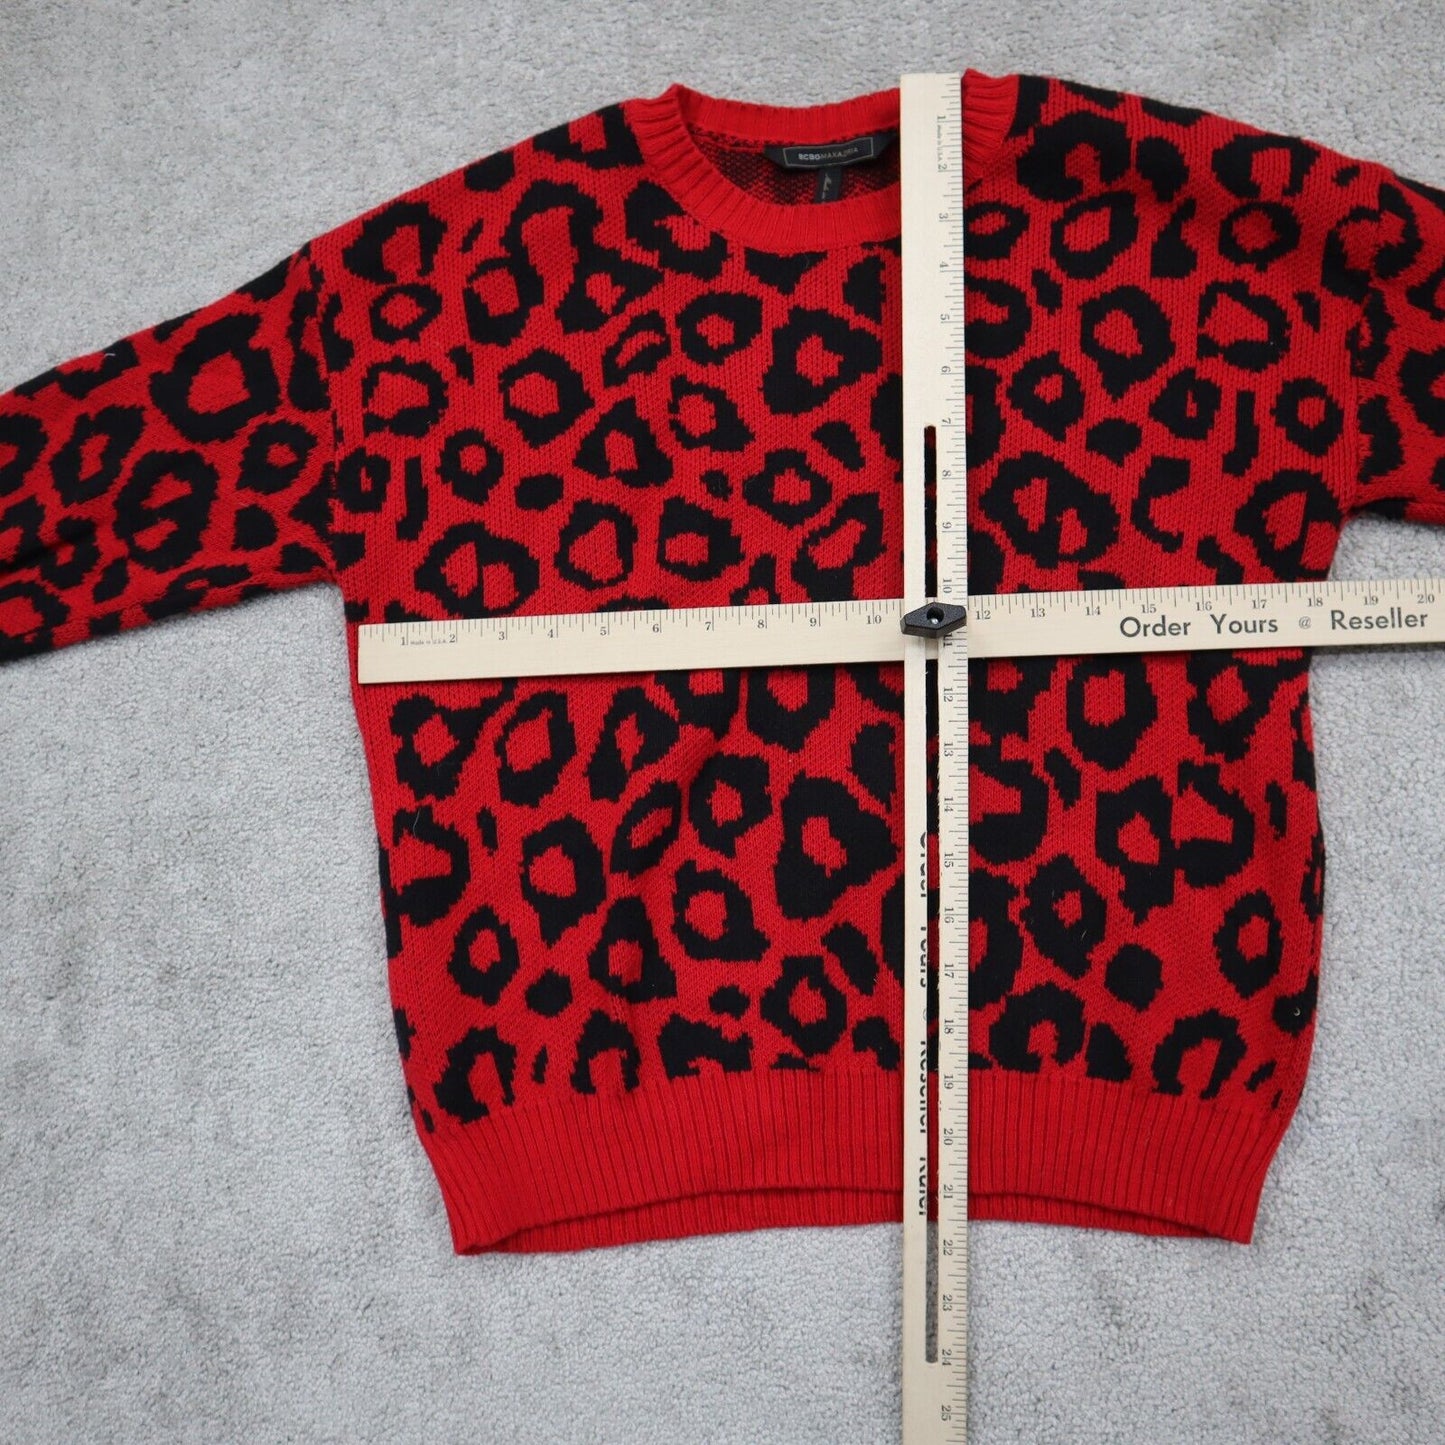 BCBGMAXAZRIA Womens Knitted Sweater Long Sleeves Leopard Red Black Size X Small